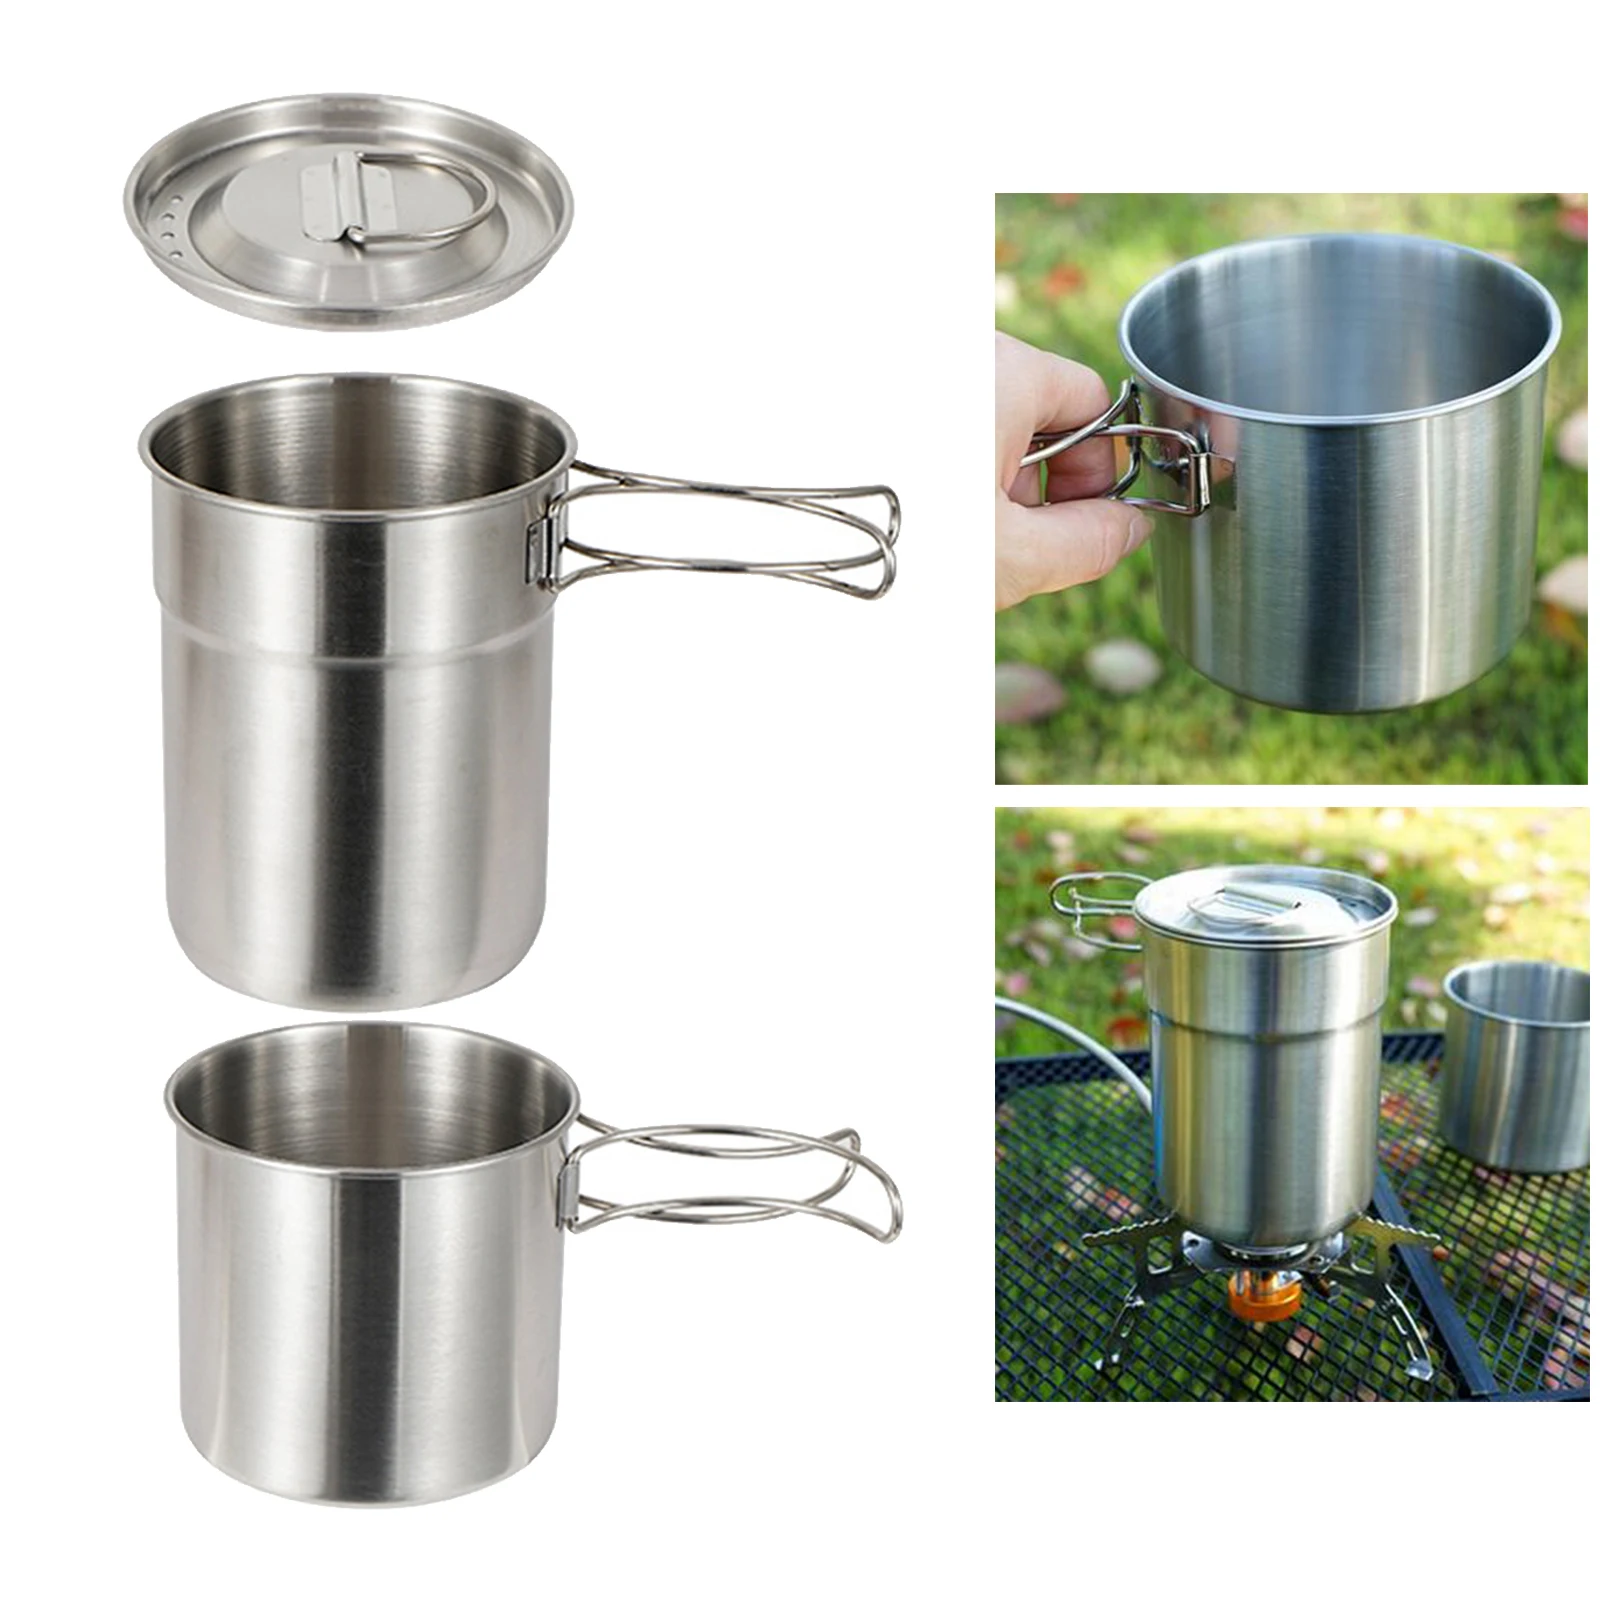 Portable 2x Camping Cup Kit Drinking Soup Cookware Cooking Bowl Camp Outdoor